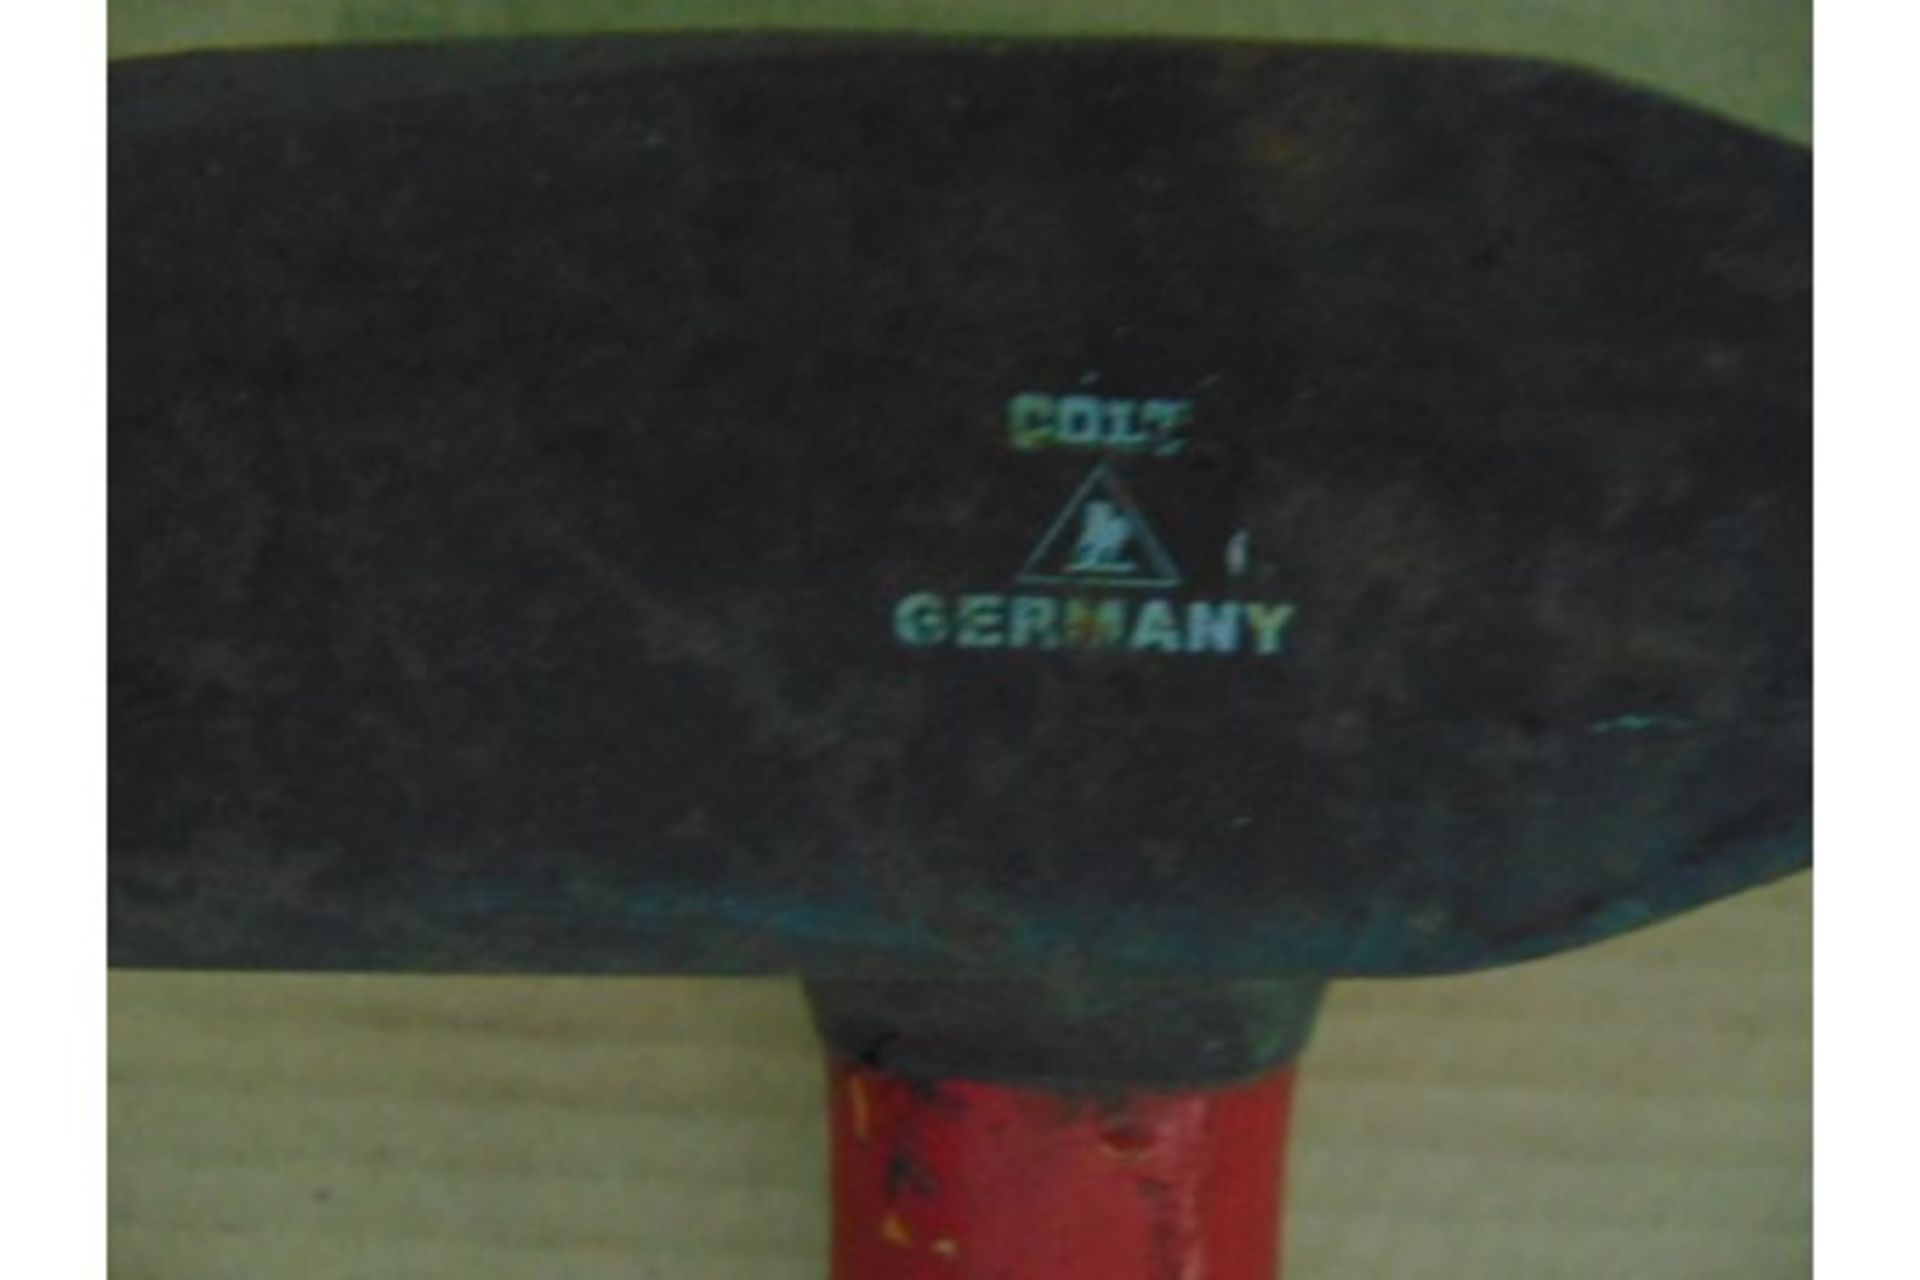 4 x Colt Germany Sledge Hammers - Image 3 of 3